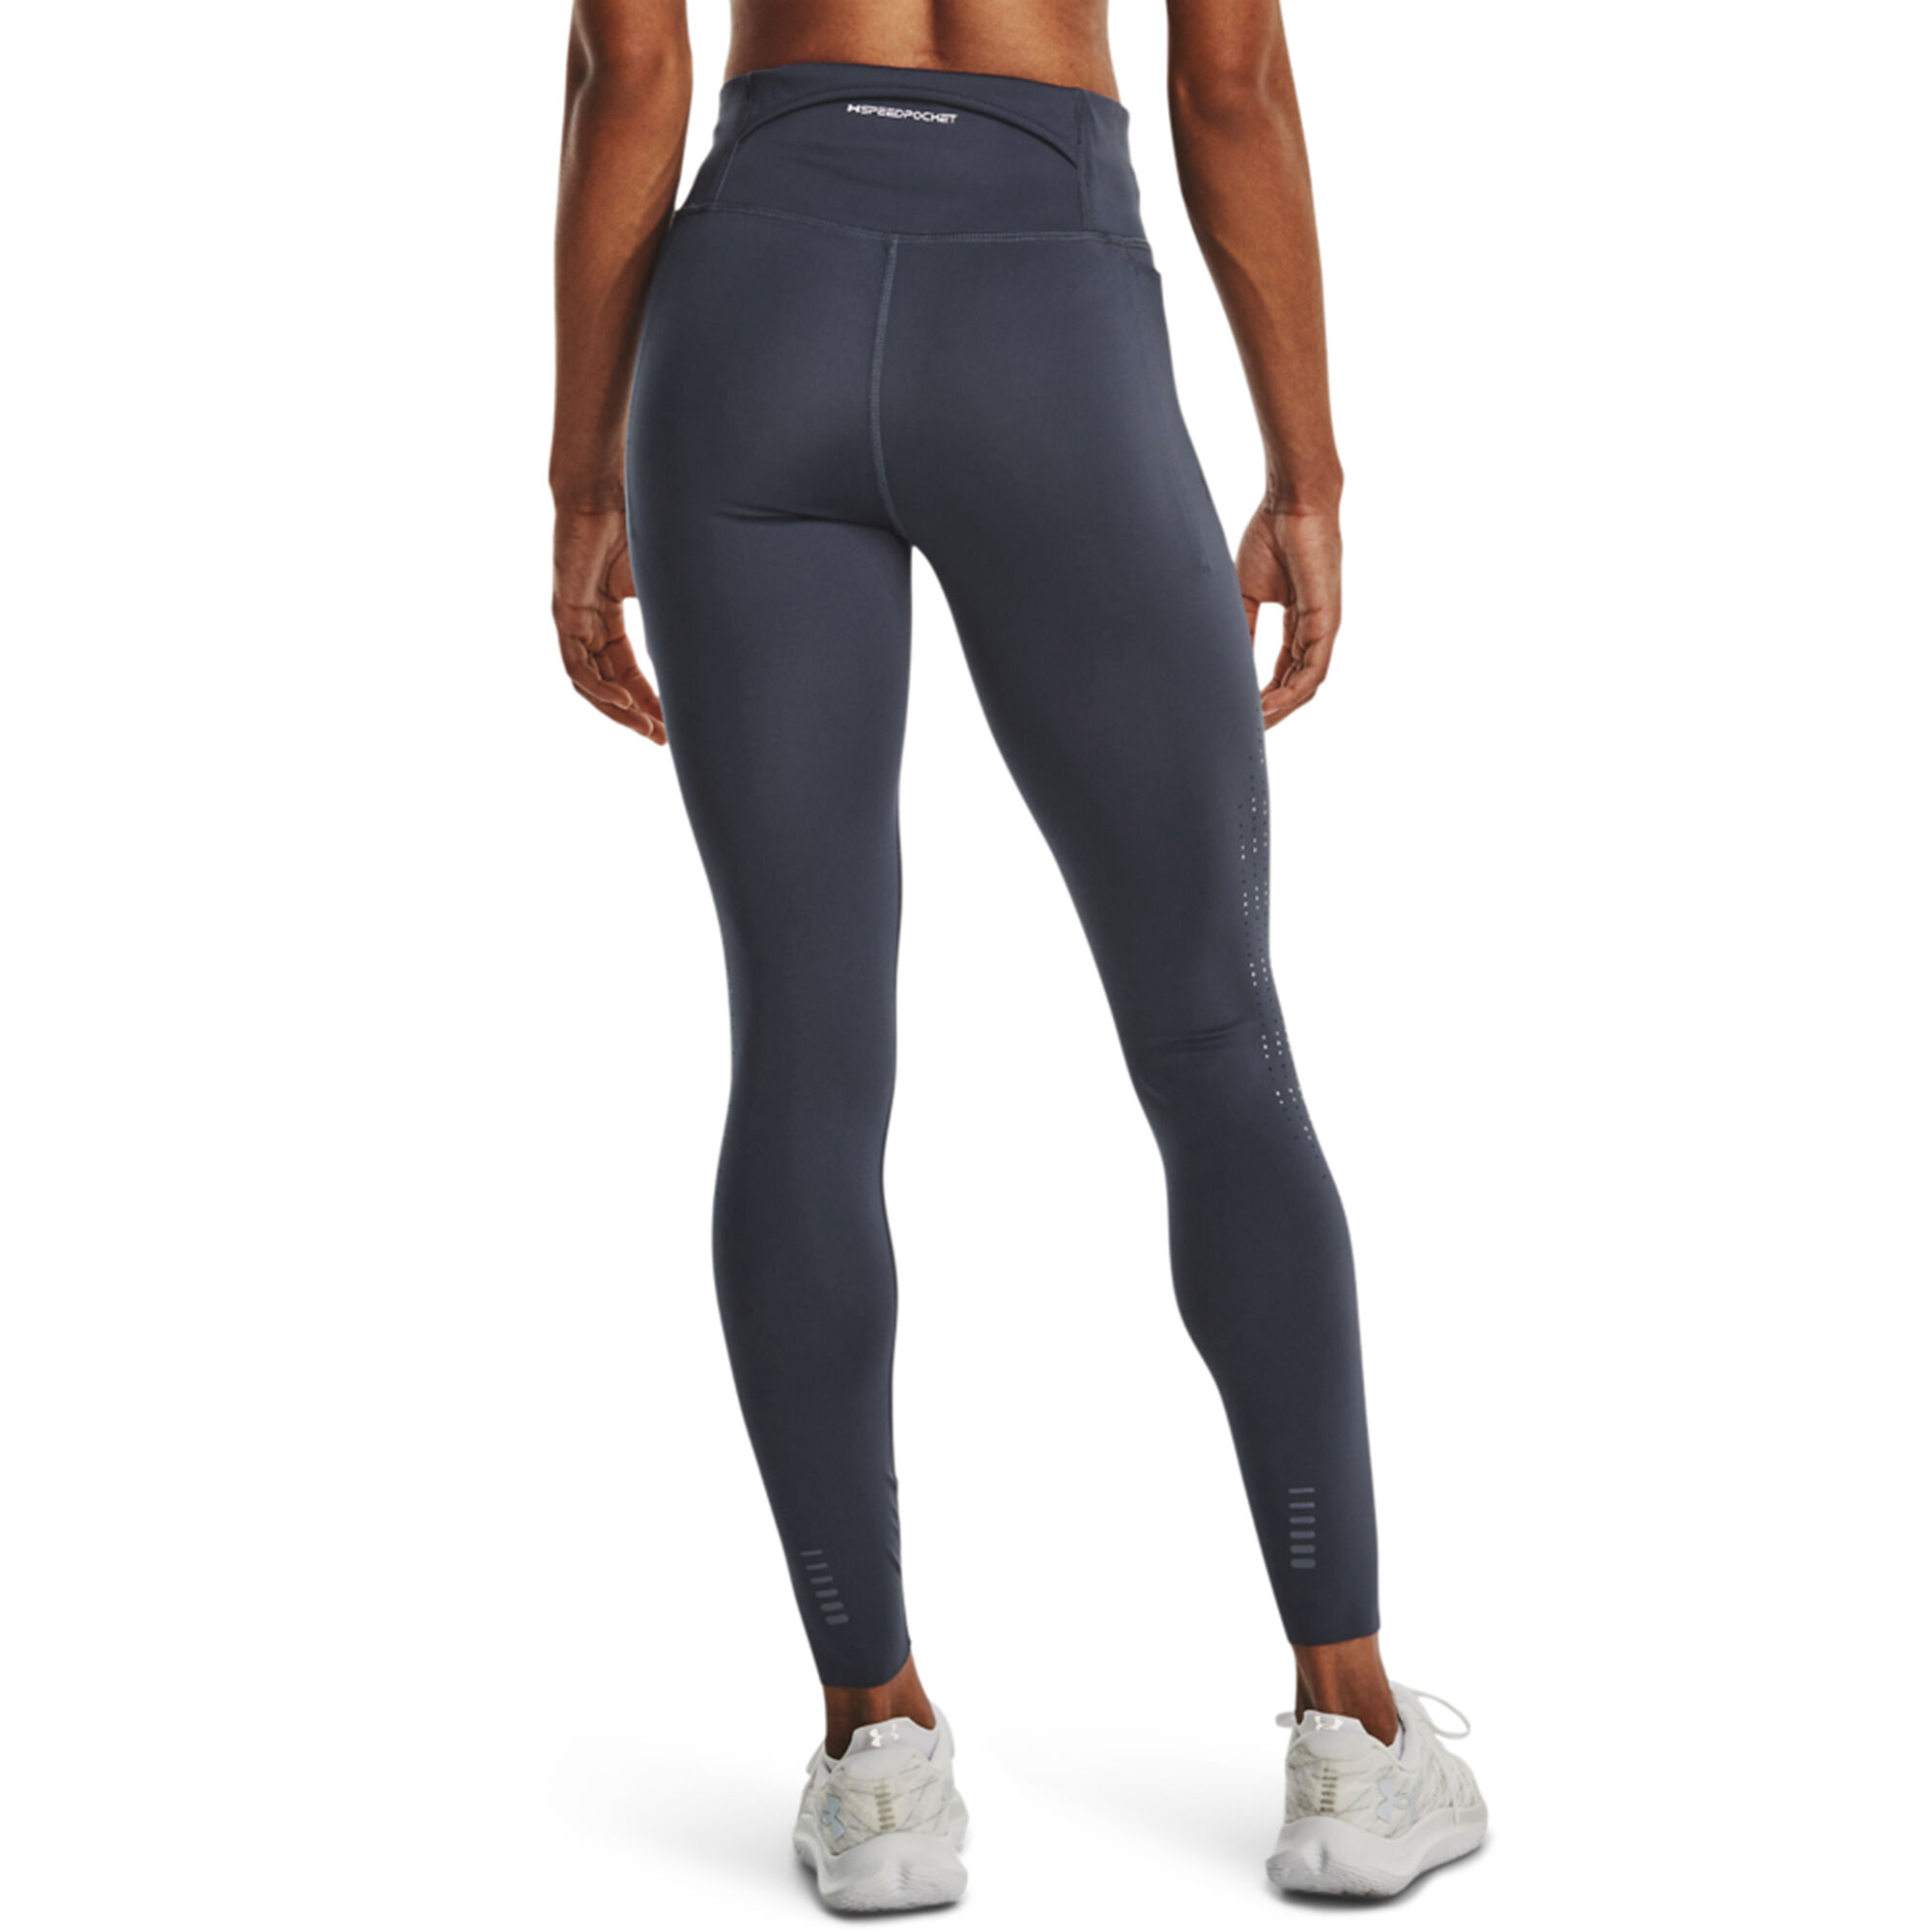 Buy Under Armour Fly Fast Elite Ankle Tight Women Grey online